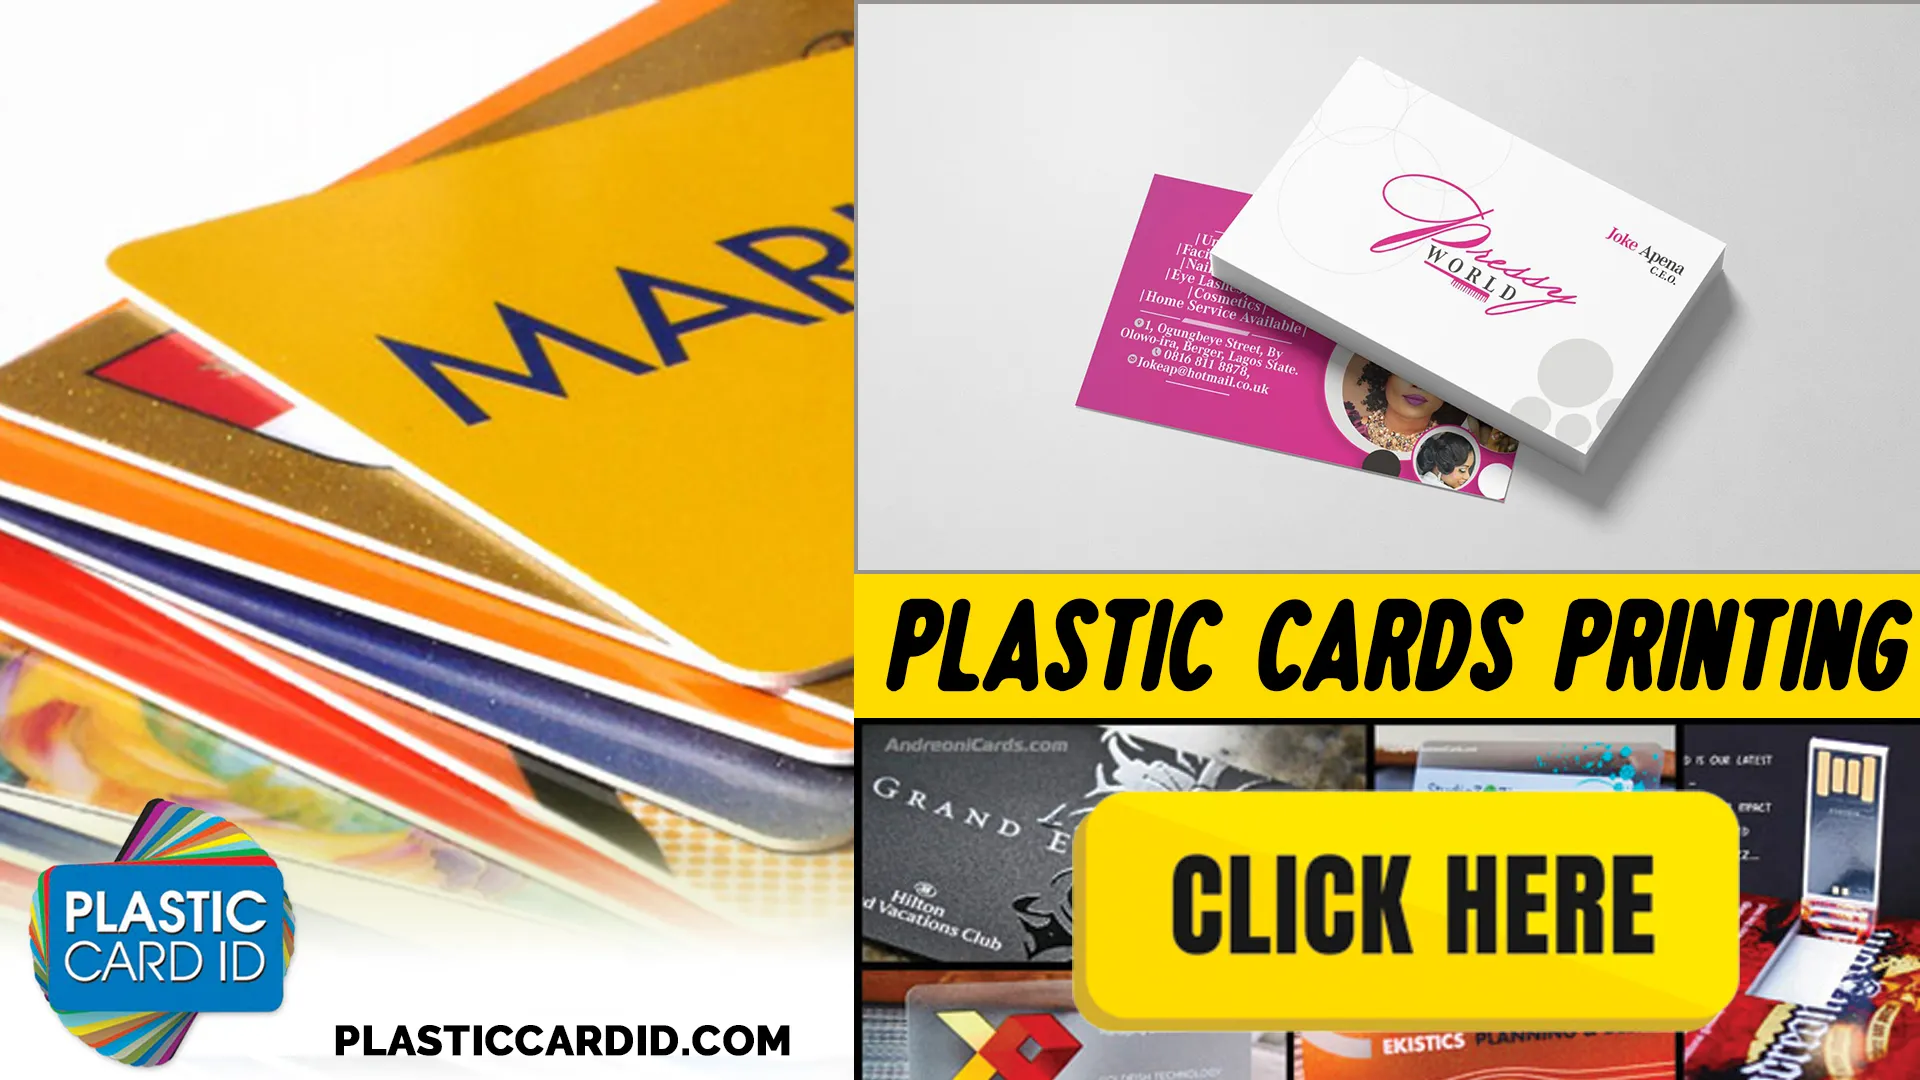 Welcome to Plastic Card ID
, Where Usability and Function Are the Heart of Our Design